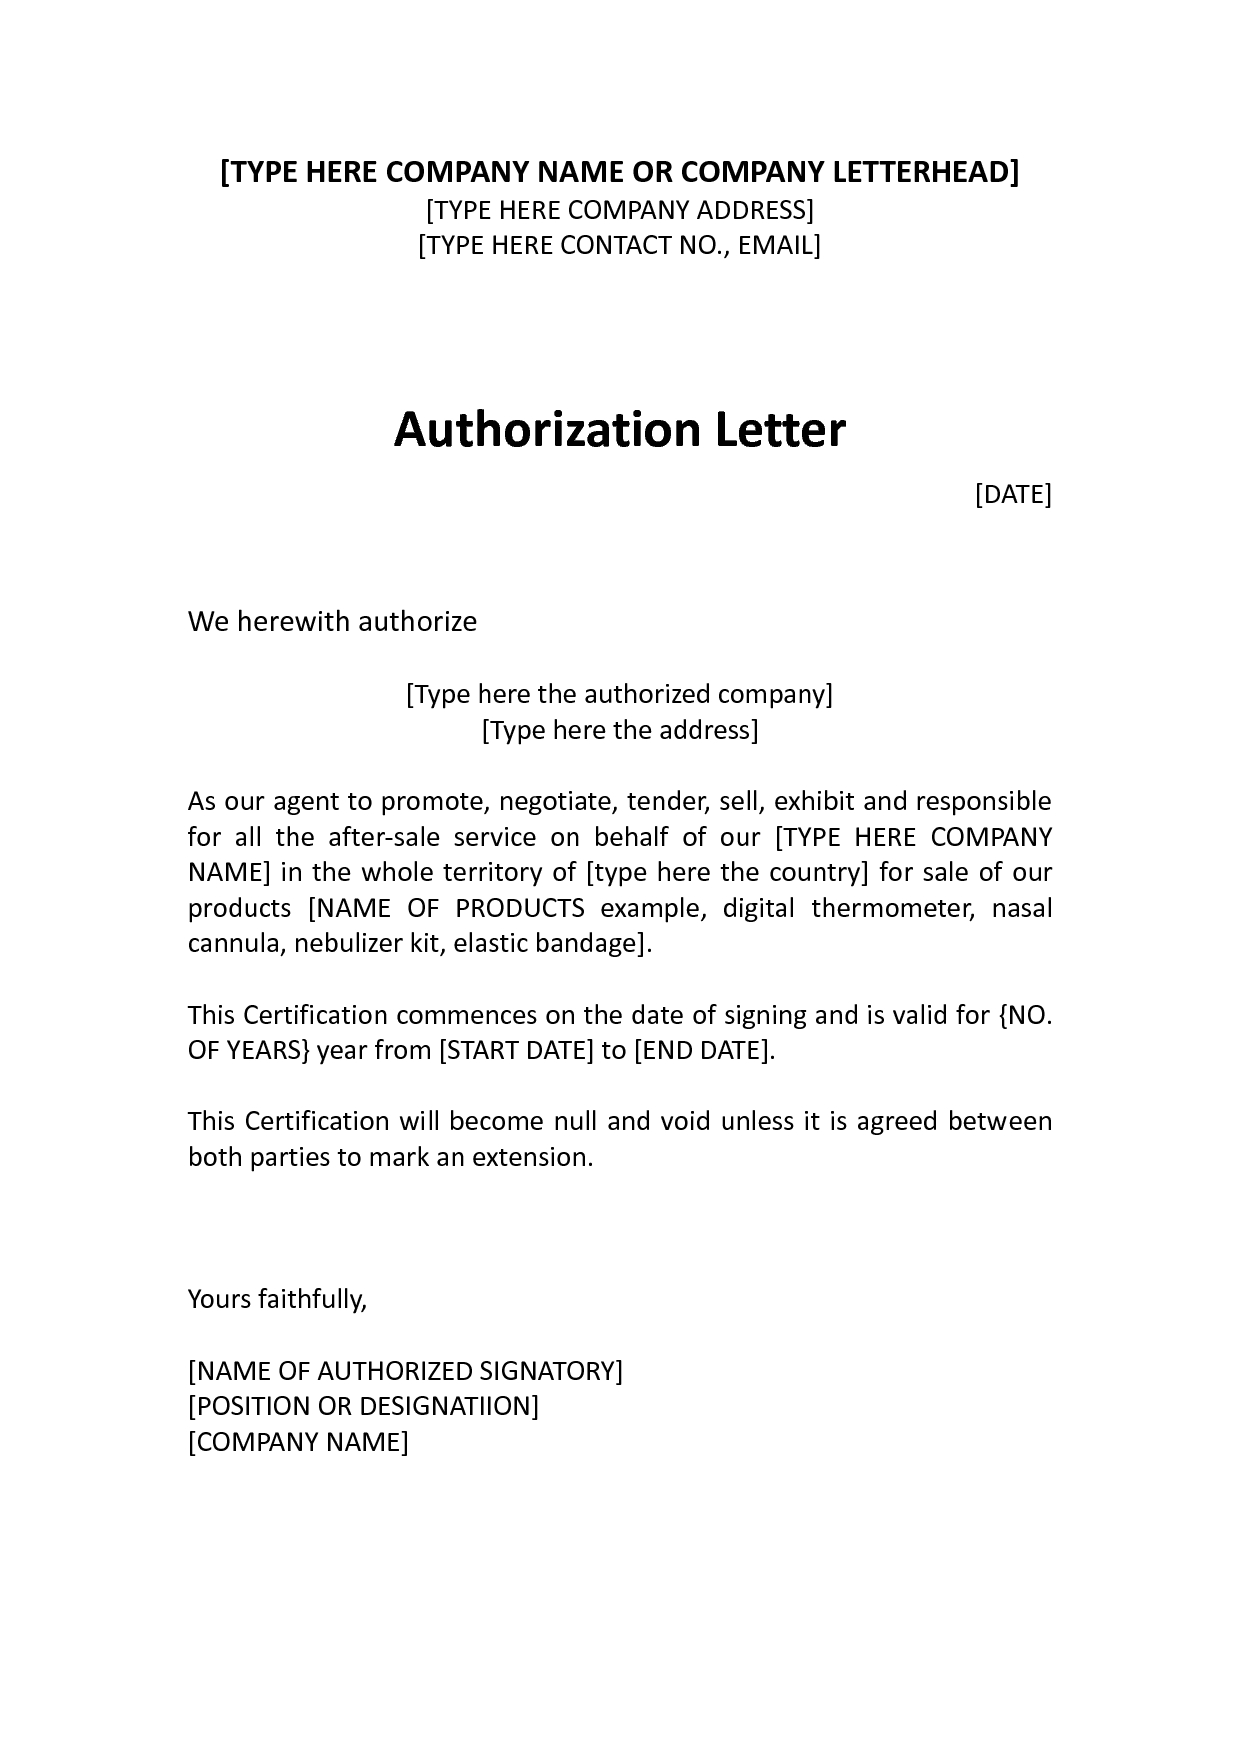 Letter Of Intent to Sell Property Template - Authorization Distributor Letter Sample Distributor Dealer